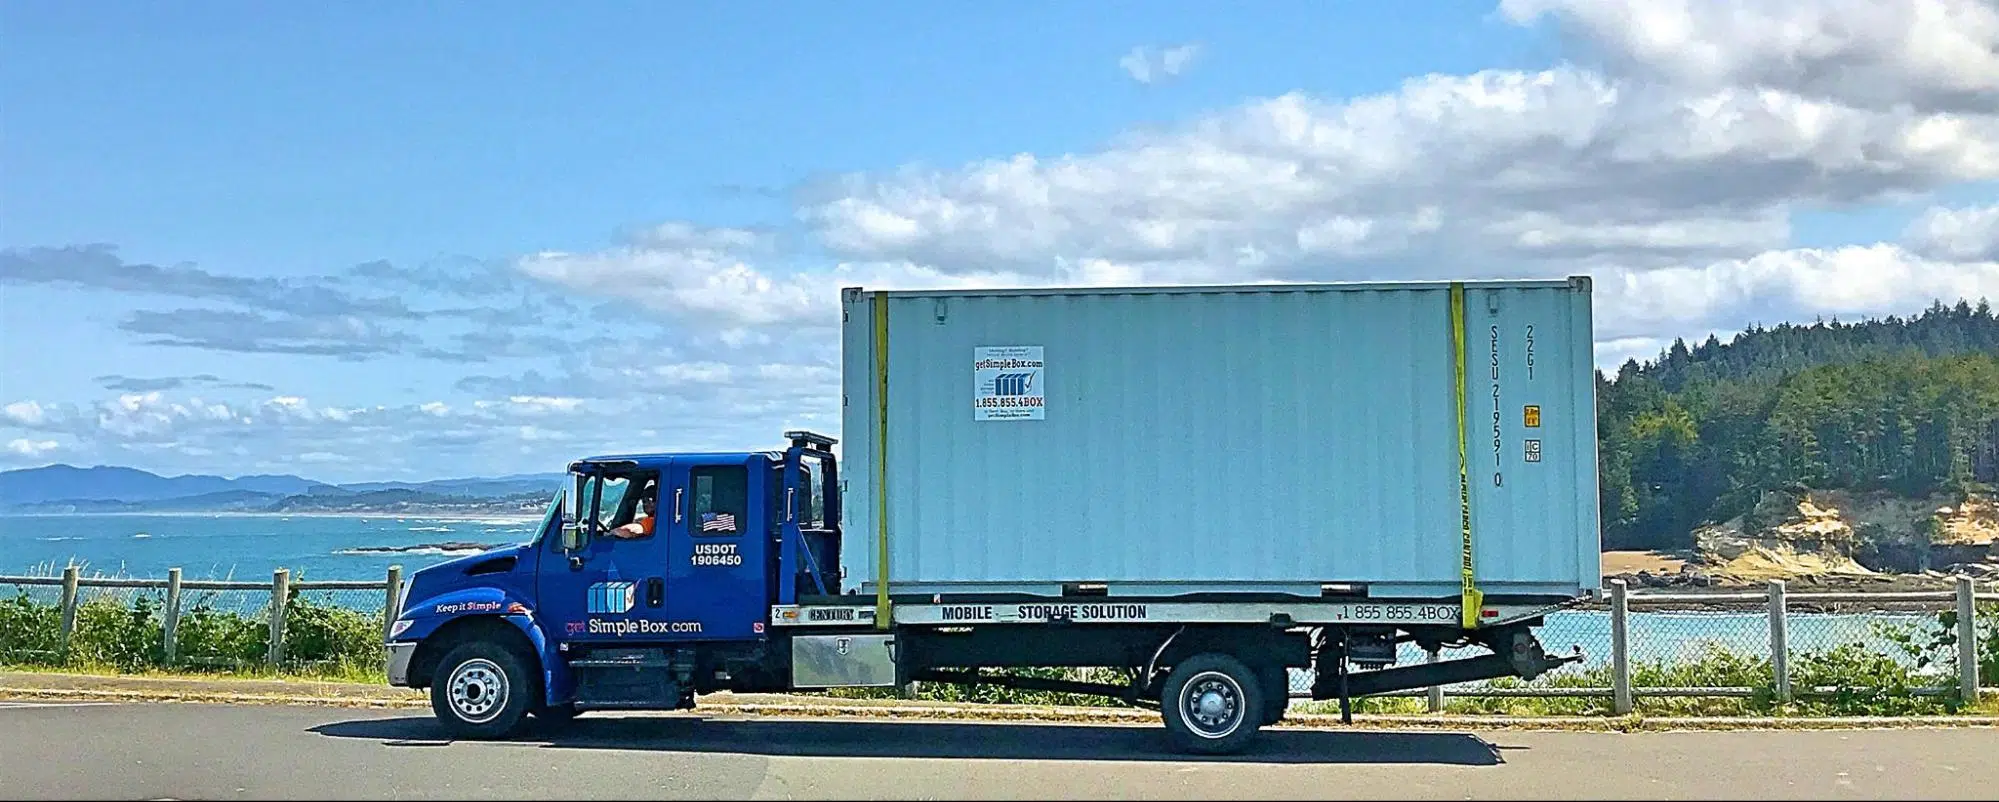 Truck with a 20 foot shipping container being delivered.